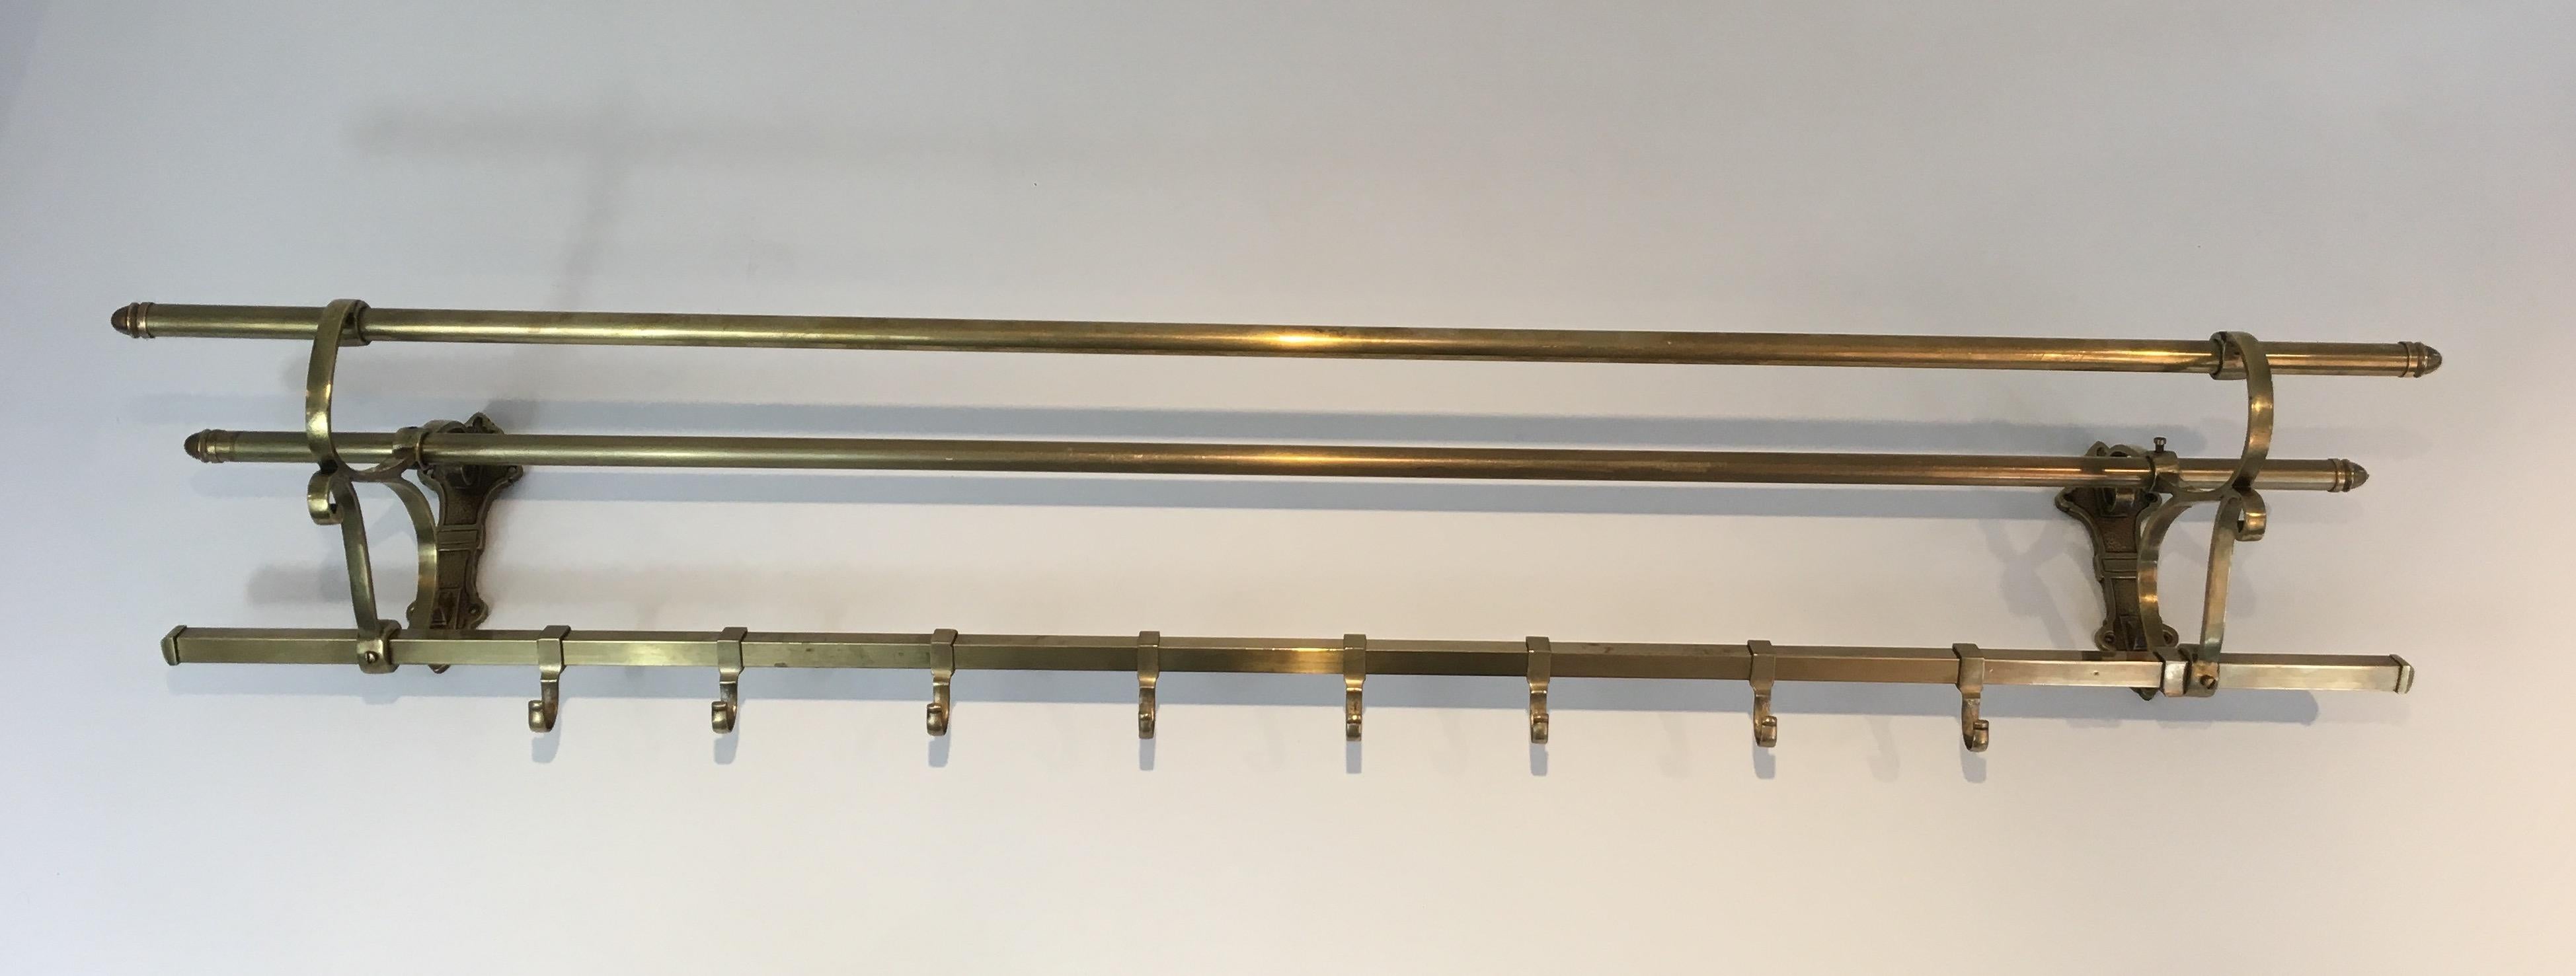 Large Brass Wall Coat Hanger, French, circa 1900 6